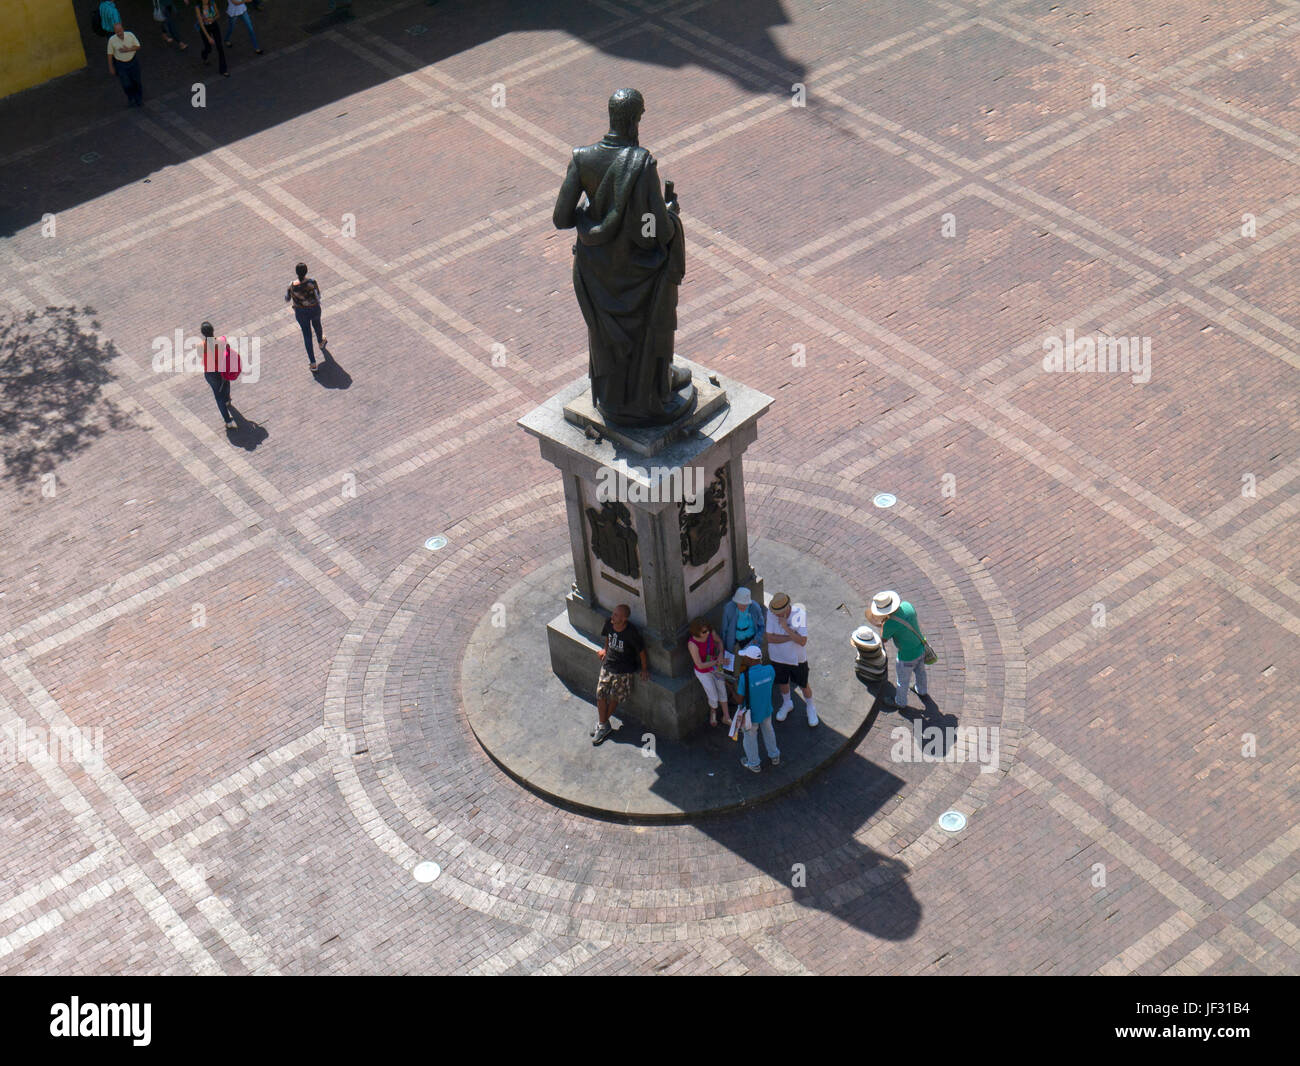 Overview of statue of Pedro de Heredia, Plaza de los Coches, Cartegena, Colombia, with hat seller and tourists Stock Photo